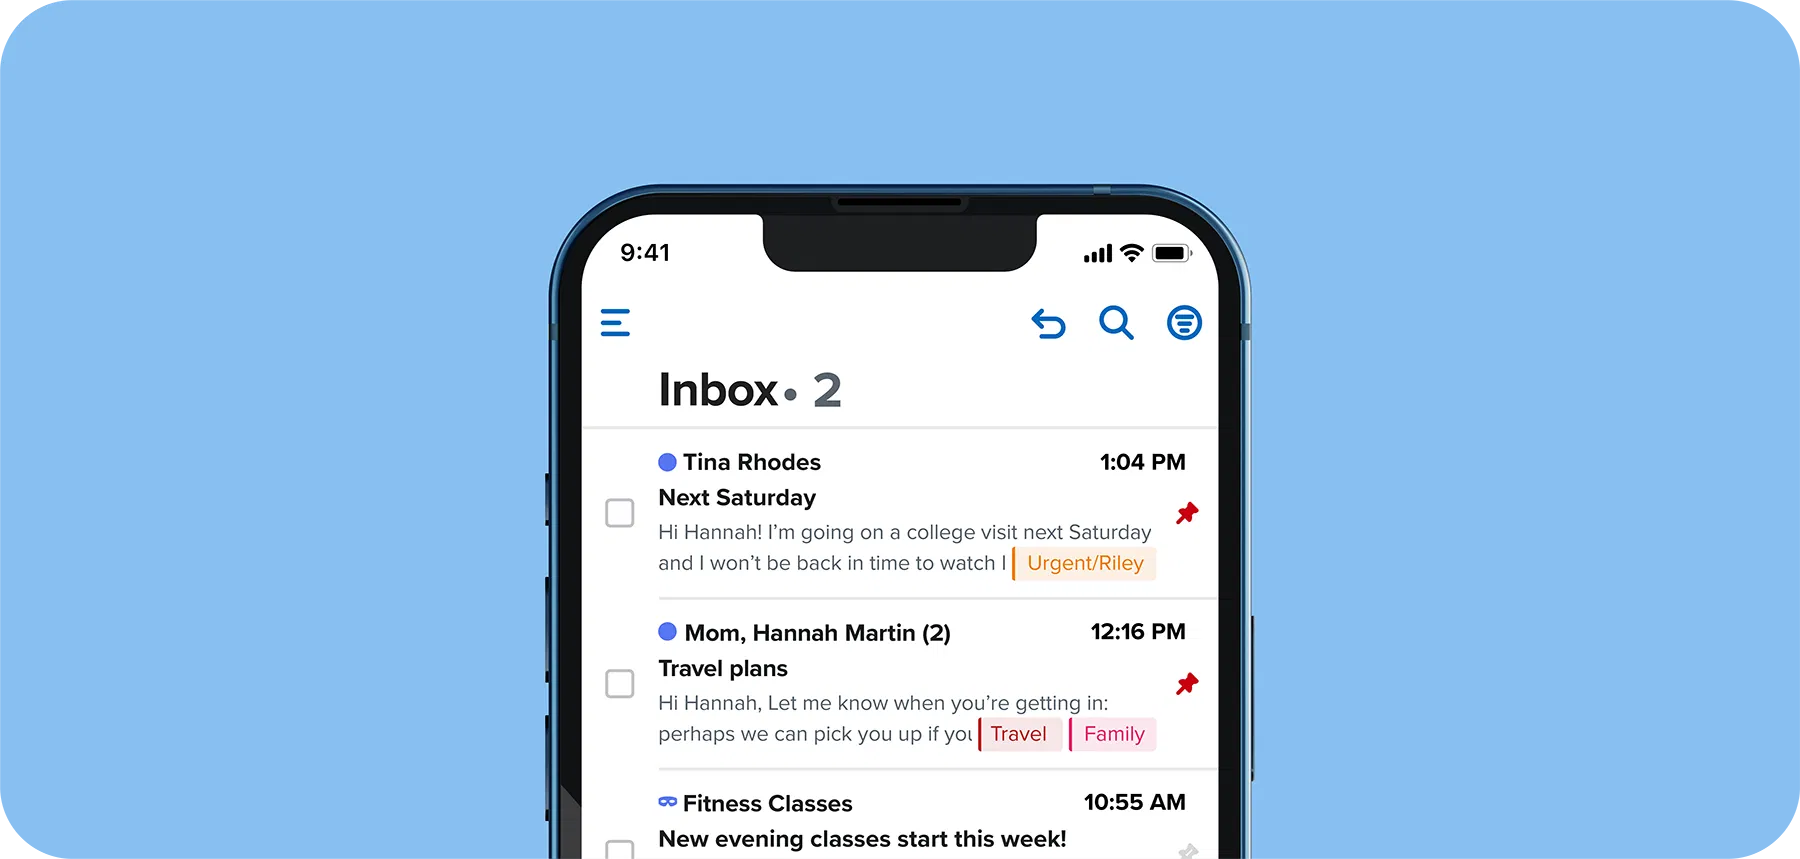 An example of FastMail Loaded on an iPhone